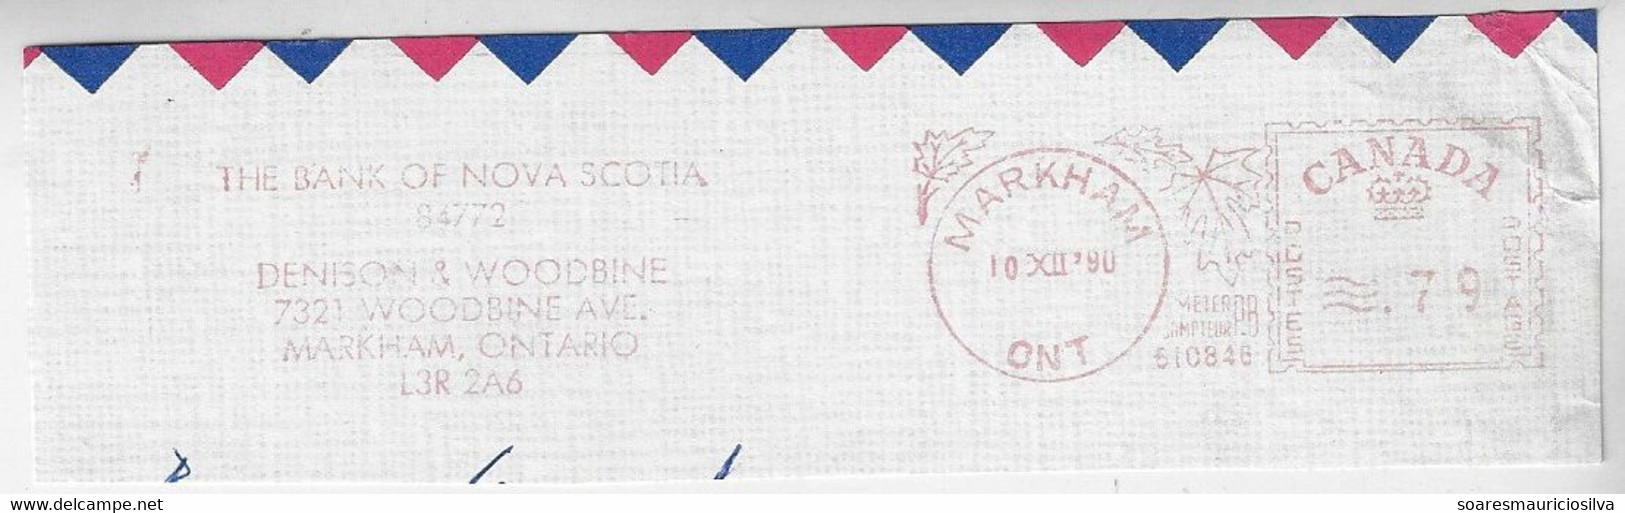 Canada 1990 Fragment Cover Meter Stamp Pitney Bowes 5300 Maple Leaf Ornaments Slogan Bank Of Nova Scotia In Markham - Lettres & Documents